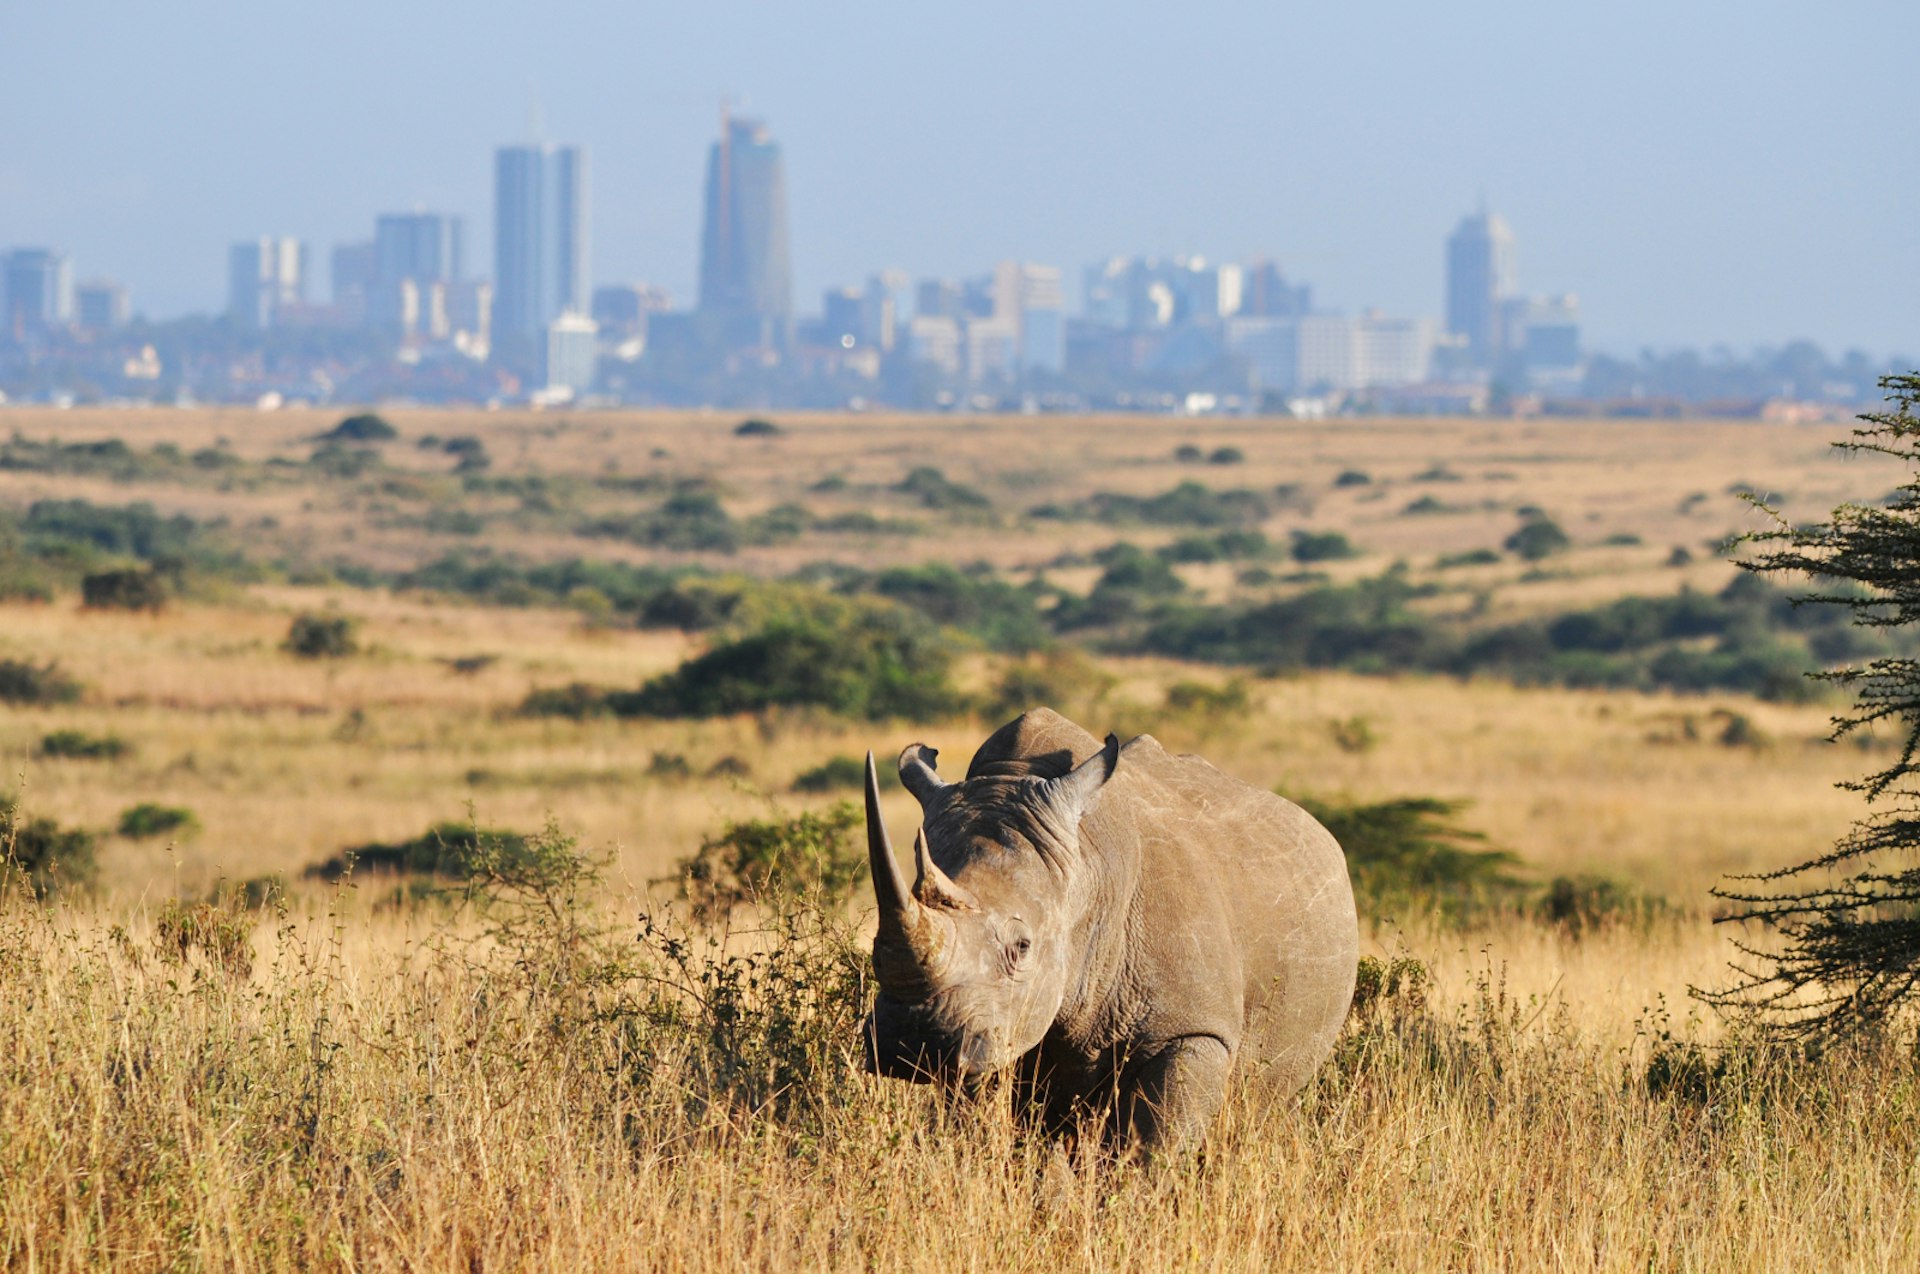 A white rhino walks towards the camera through long grass, with the city skyline in the distance © Verónica Paradinas Duro / Getty Images